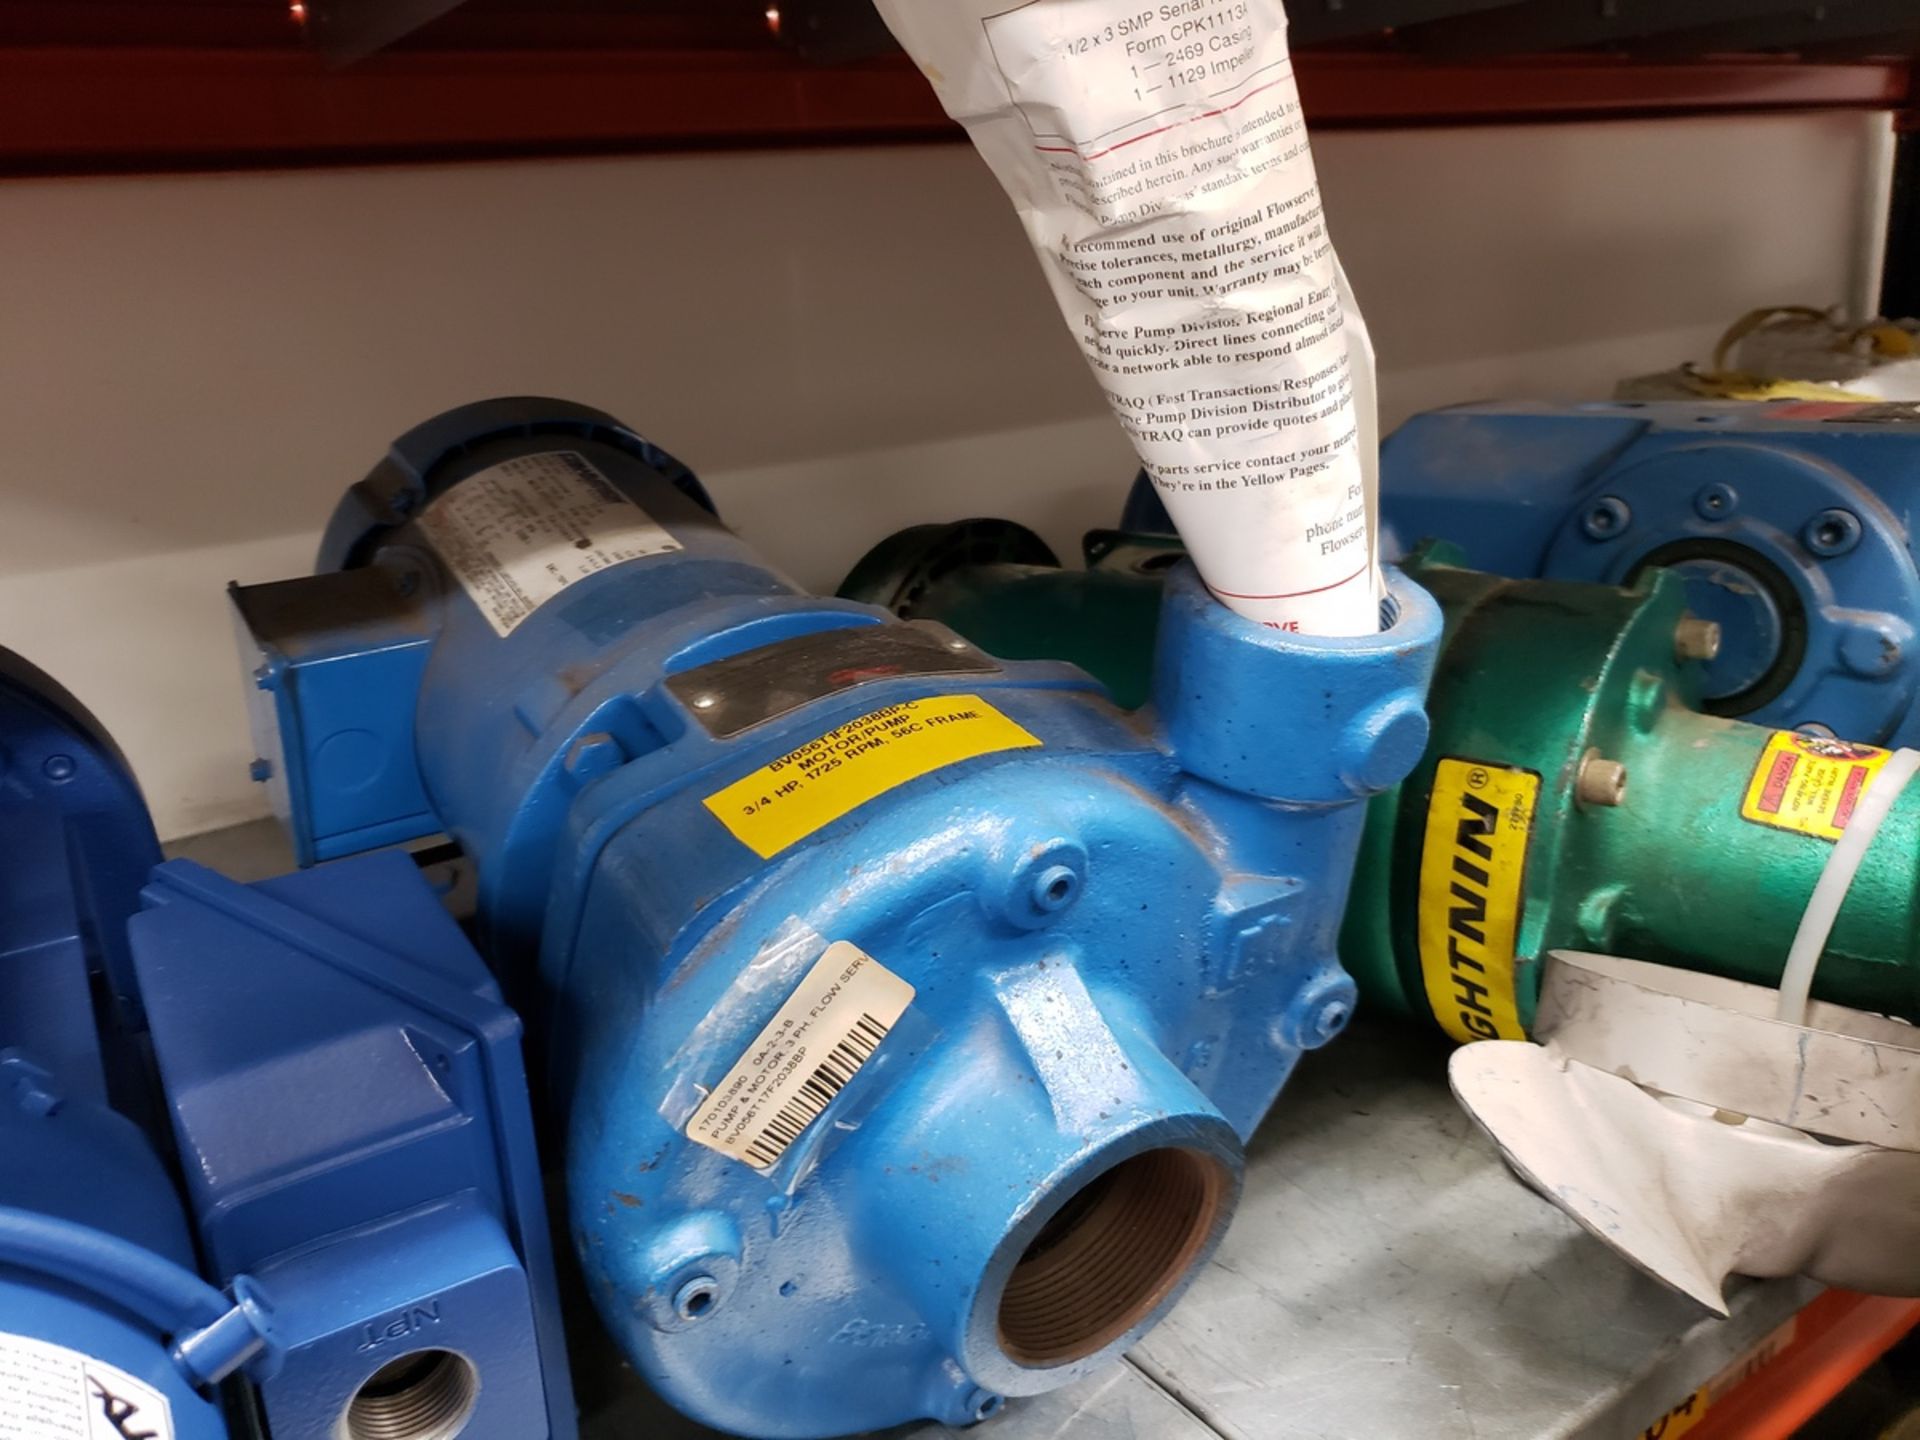 Lot of Pumps, Electric Motors & Gearboxes - Subj to Bulk | Reqd Rig Fee: $100 - Image 3 of 6